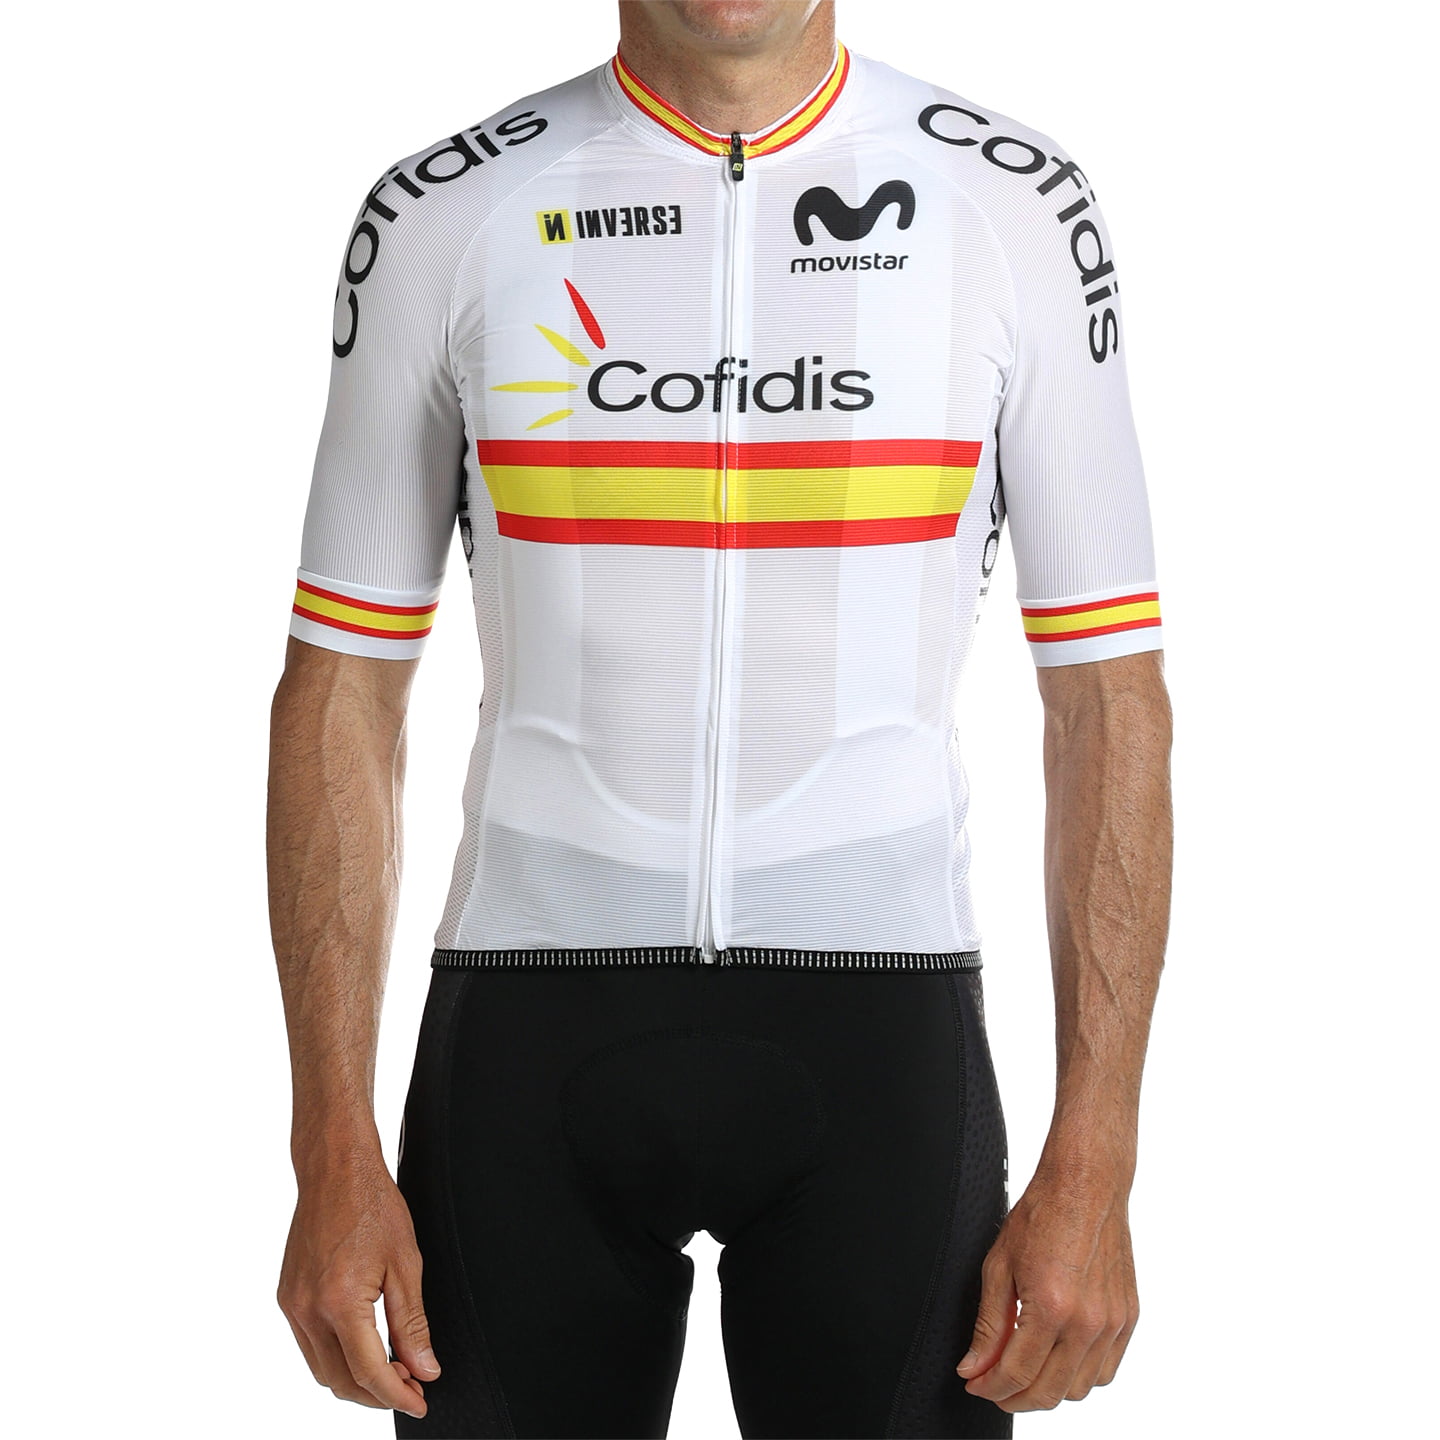 SPANISH NATIONAL TEAM 2024 Short Sleeve Jersey, for men, size M, Cycle jersey, Cycling clothing